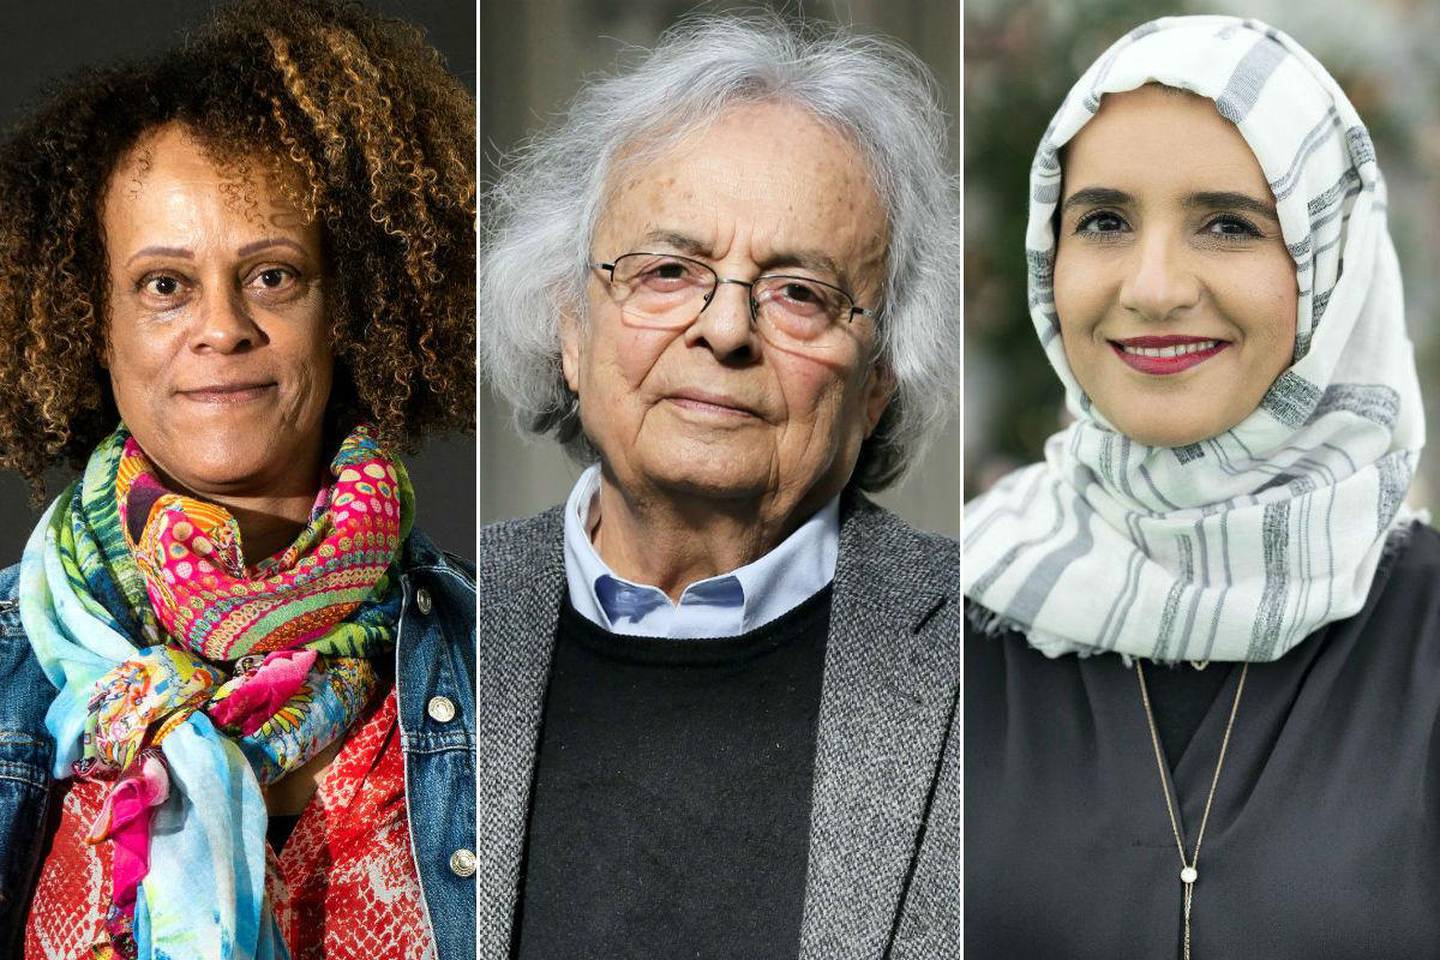 Bernadine Evaristo, Adonis and Jokha Alharthi are among the names set to appear at the inaugural Hay Festival Abu Dhabi. 